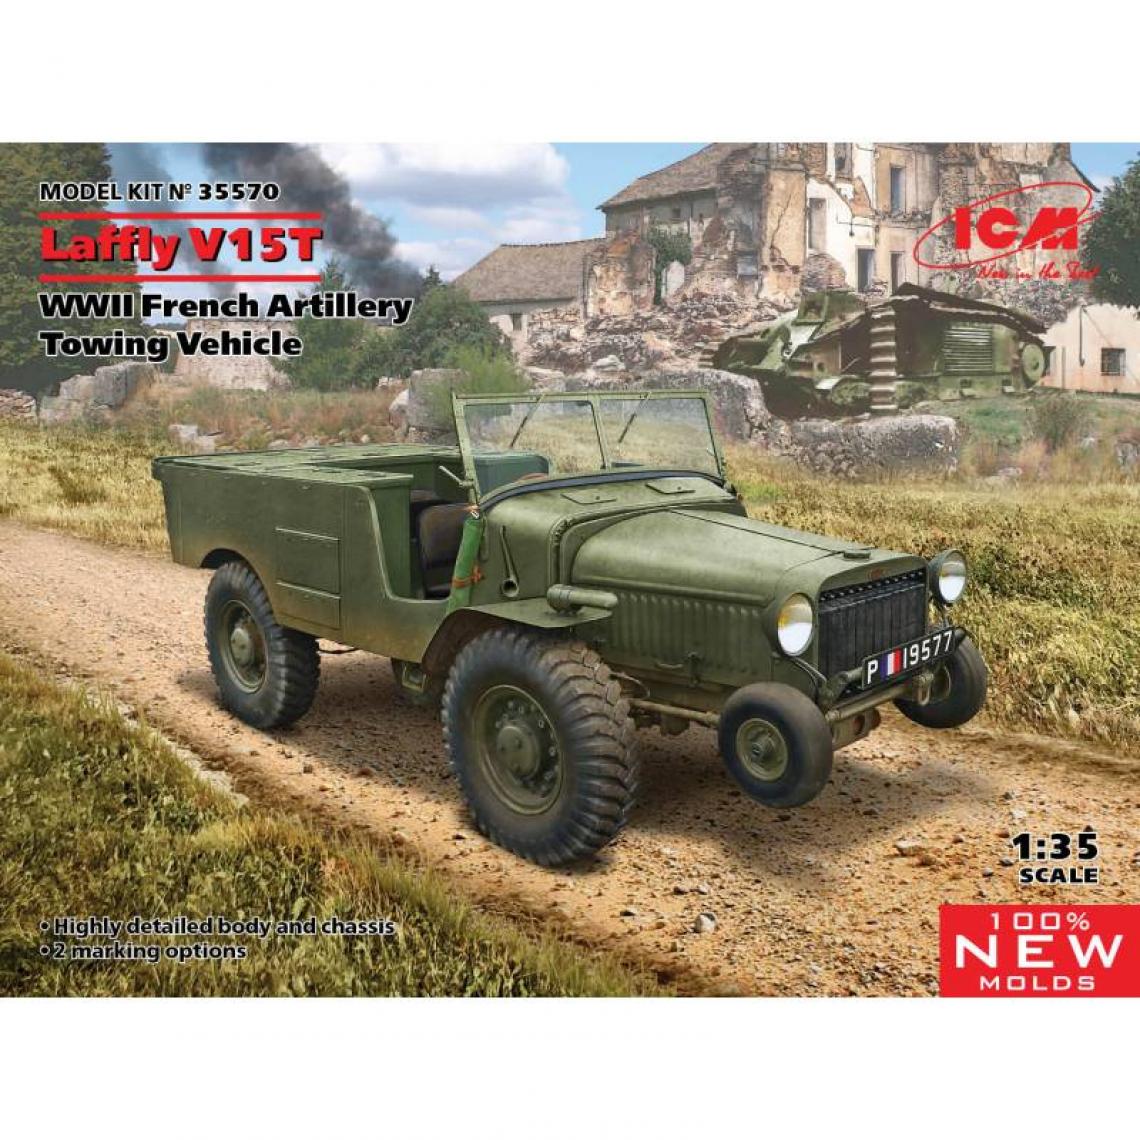 Icm - Maquette Camion Laffly V15t Wwii French Artillery Towing Vehicle - Camions